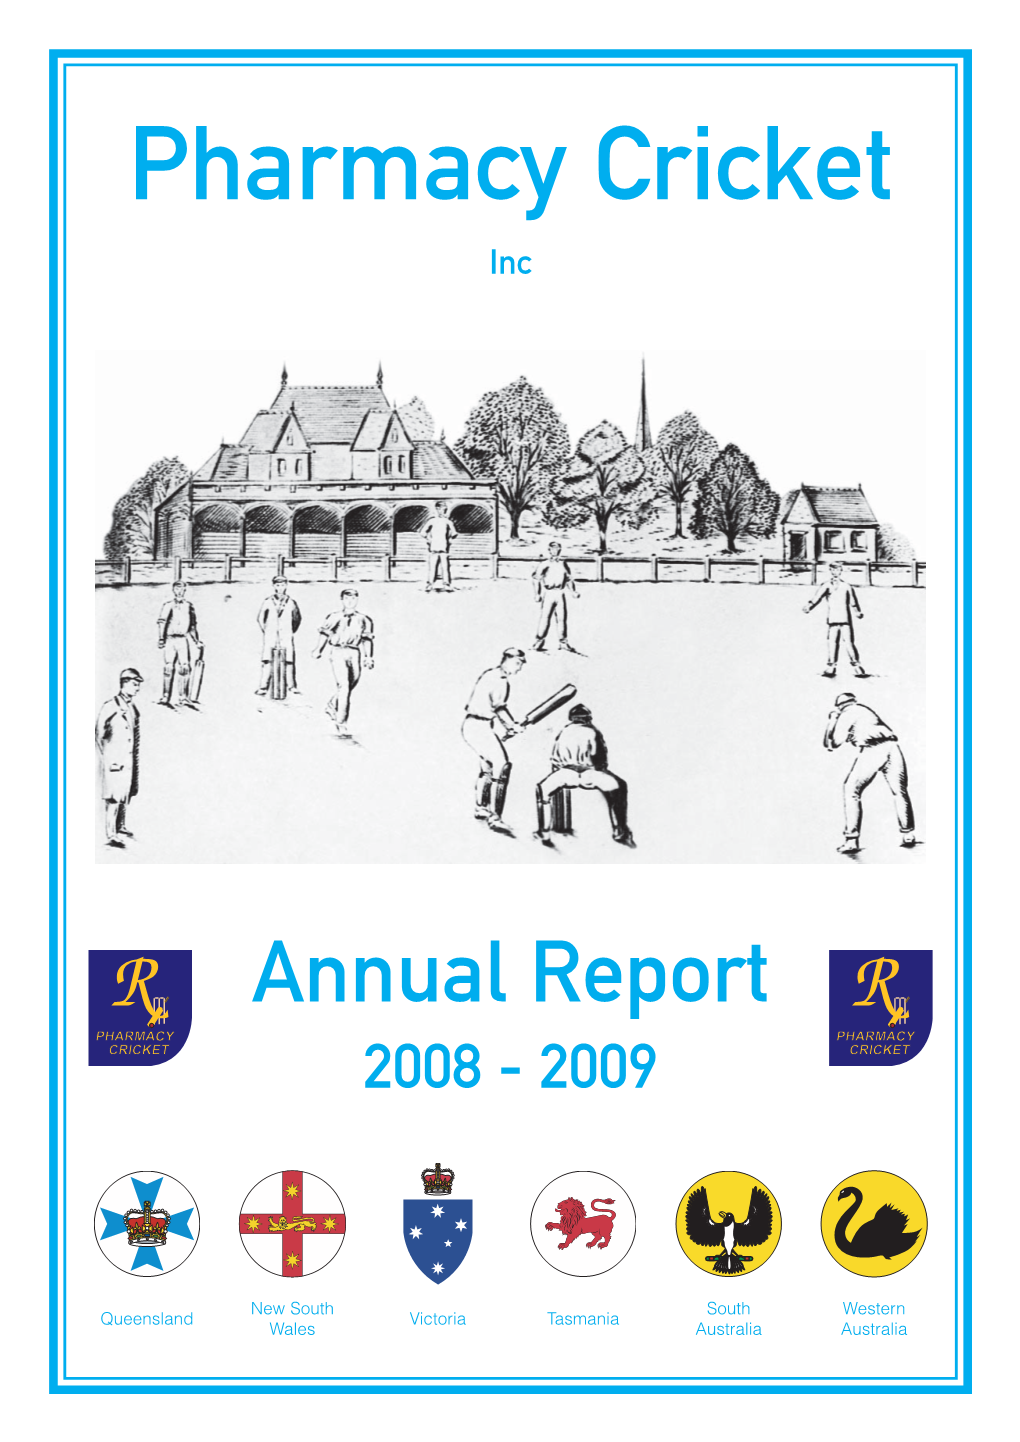 Pharmacy Cricket Annual Report 2008-2009